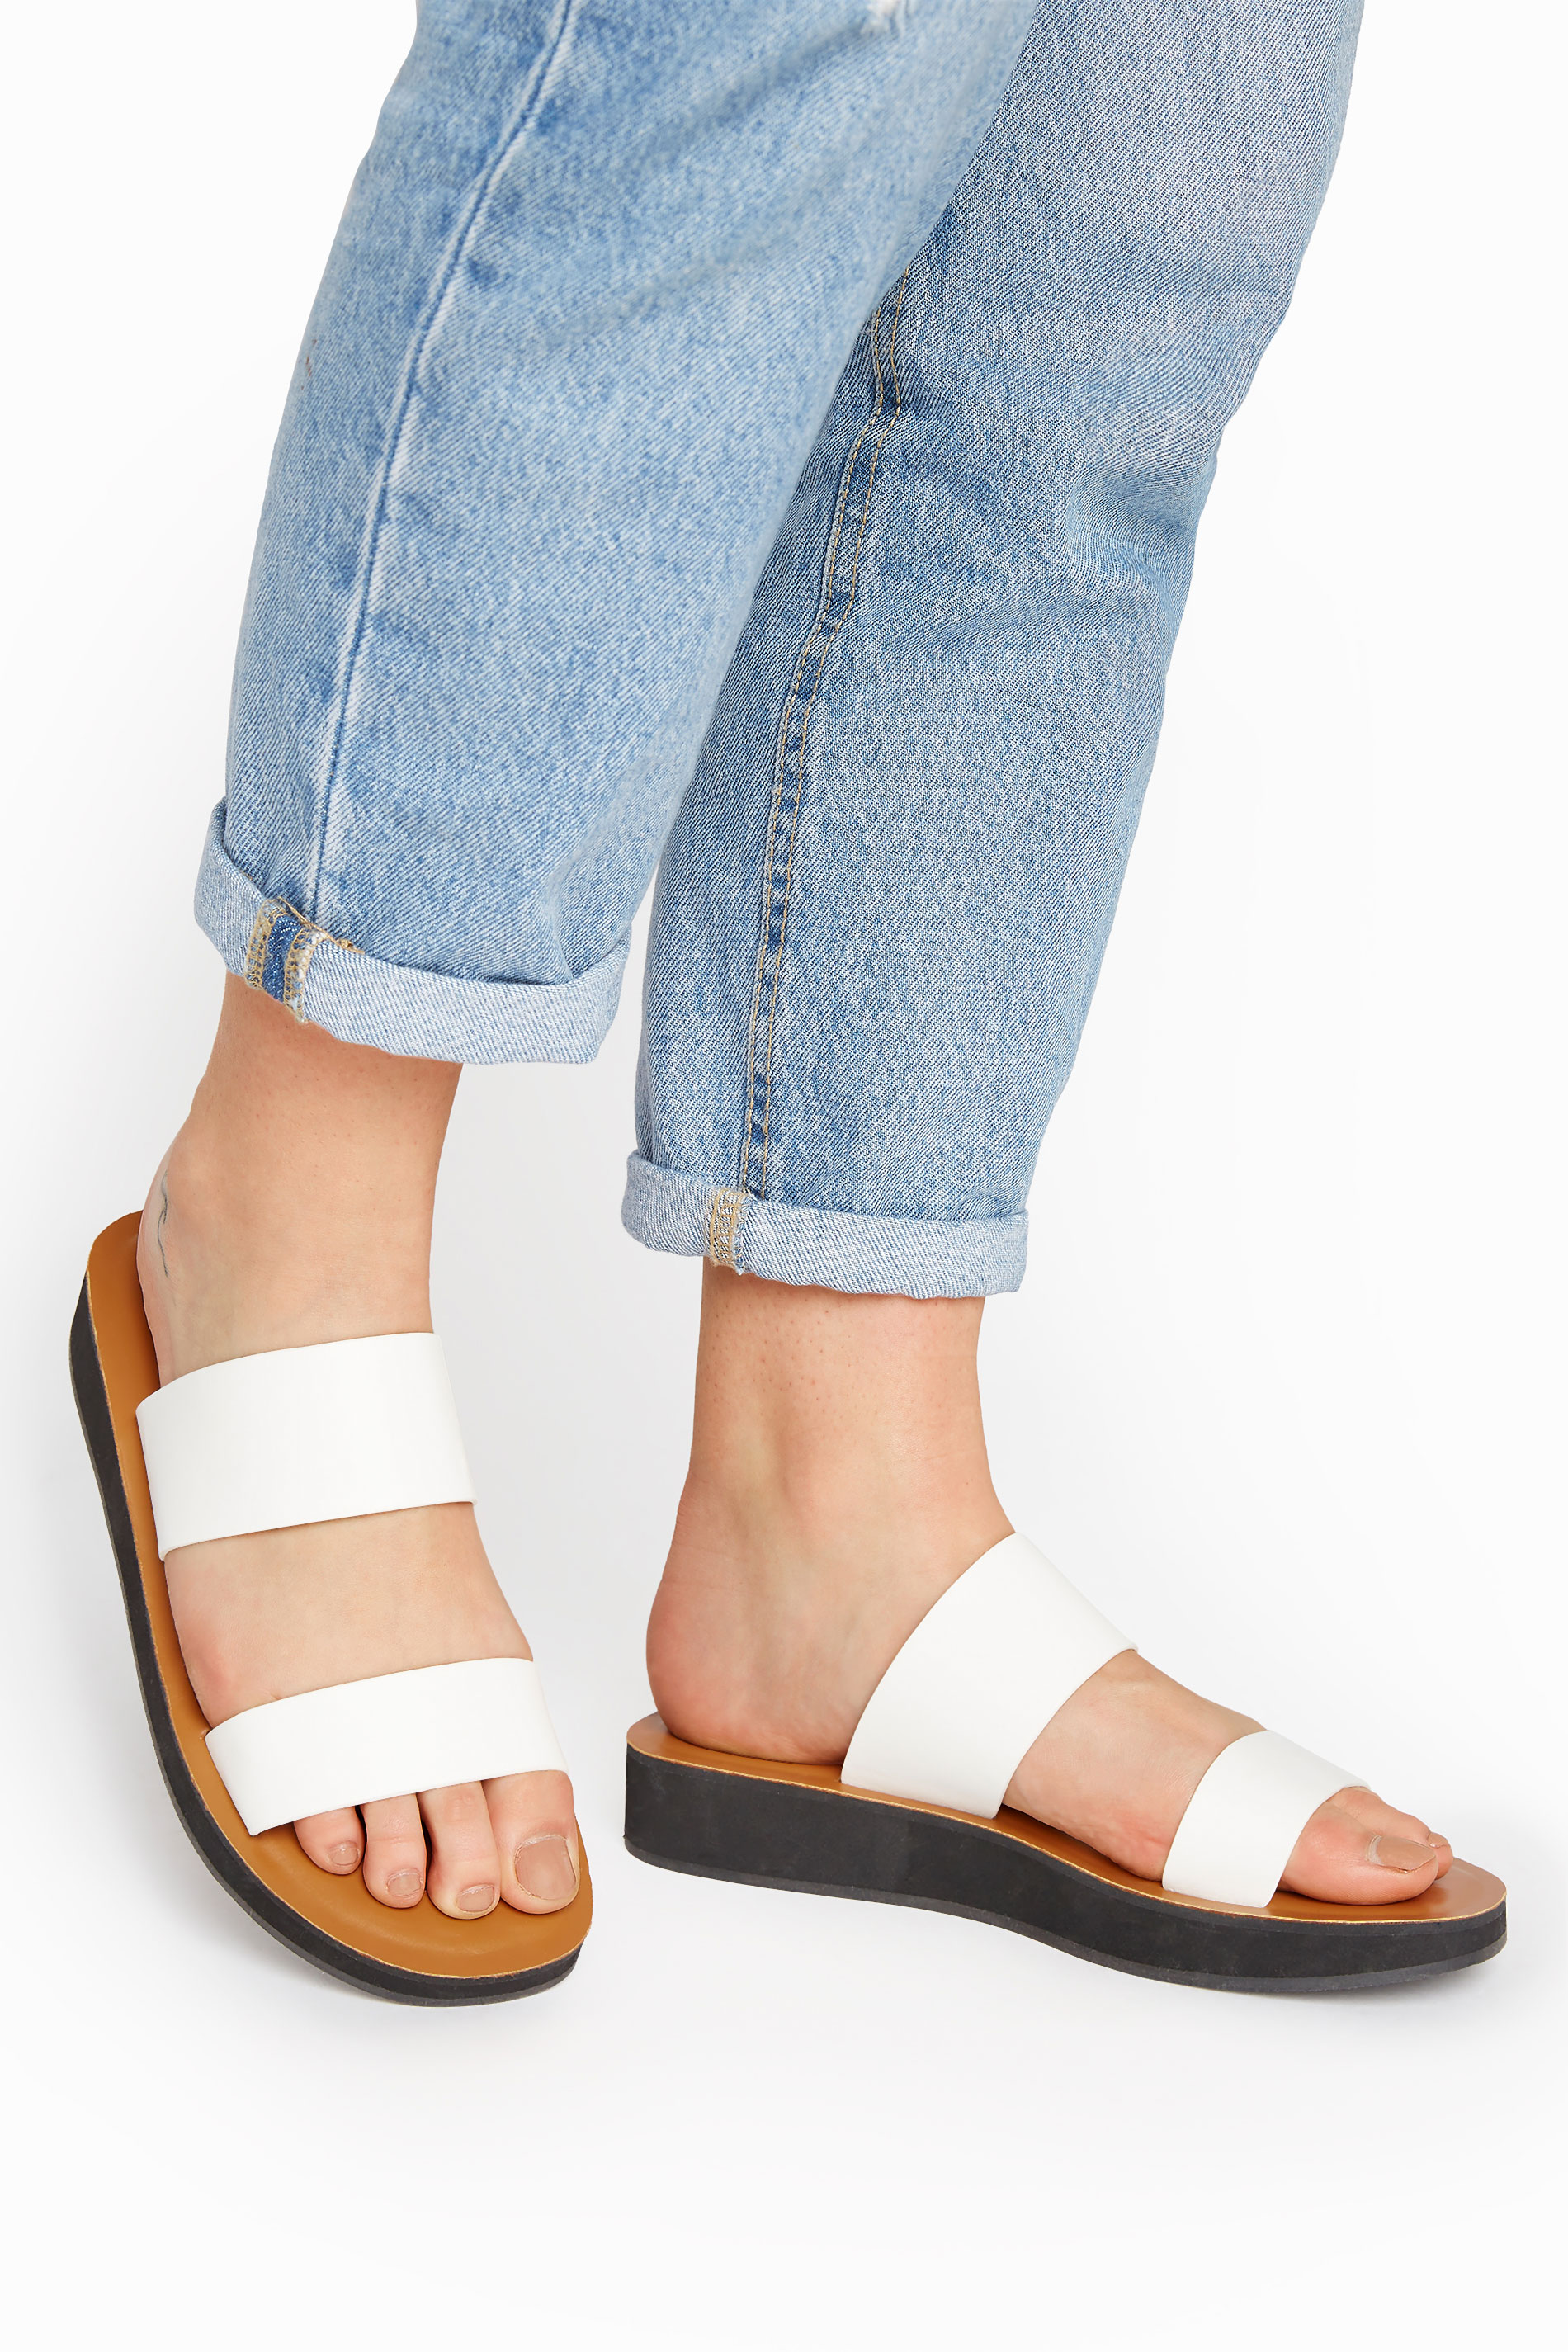 LTS White Two Strap Flat Sandals In Standard Fit | Long Tall Sally 1